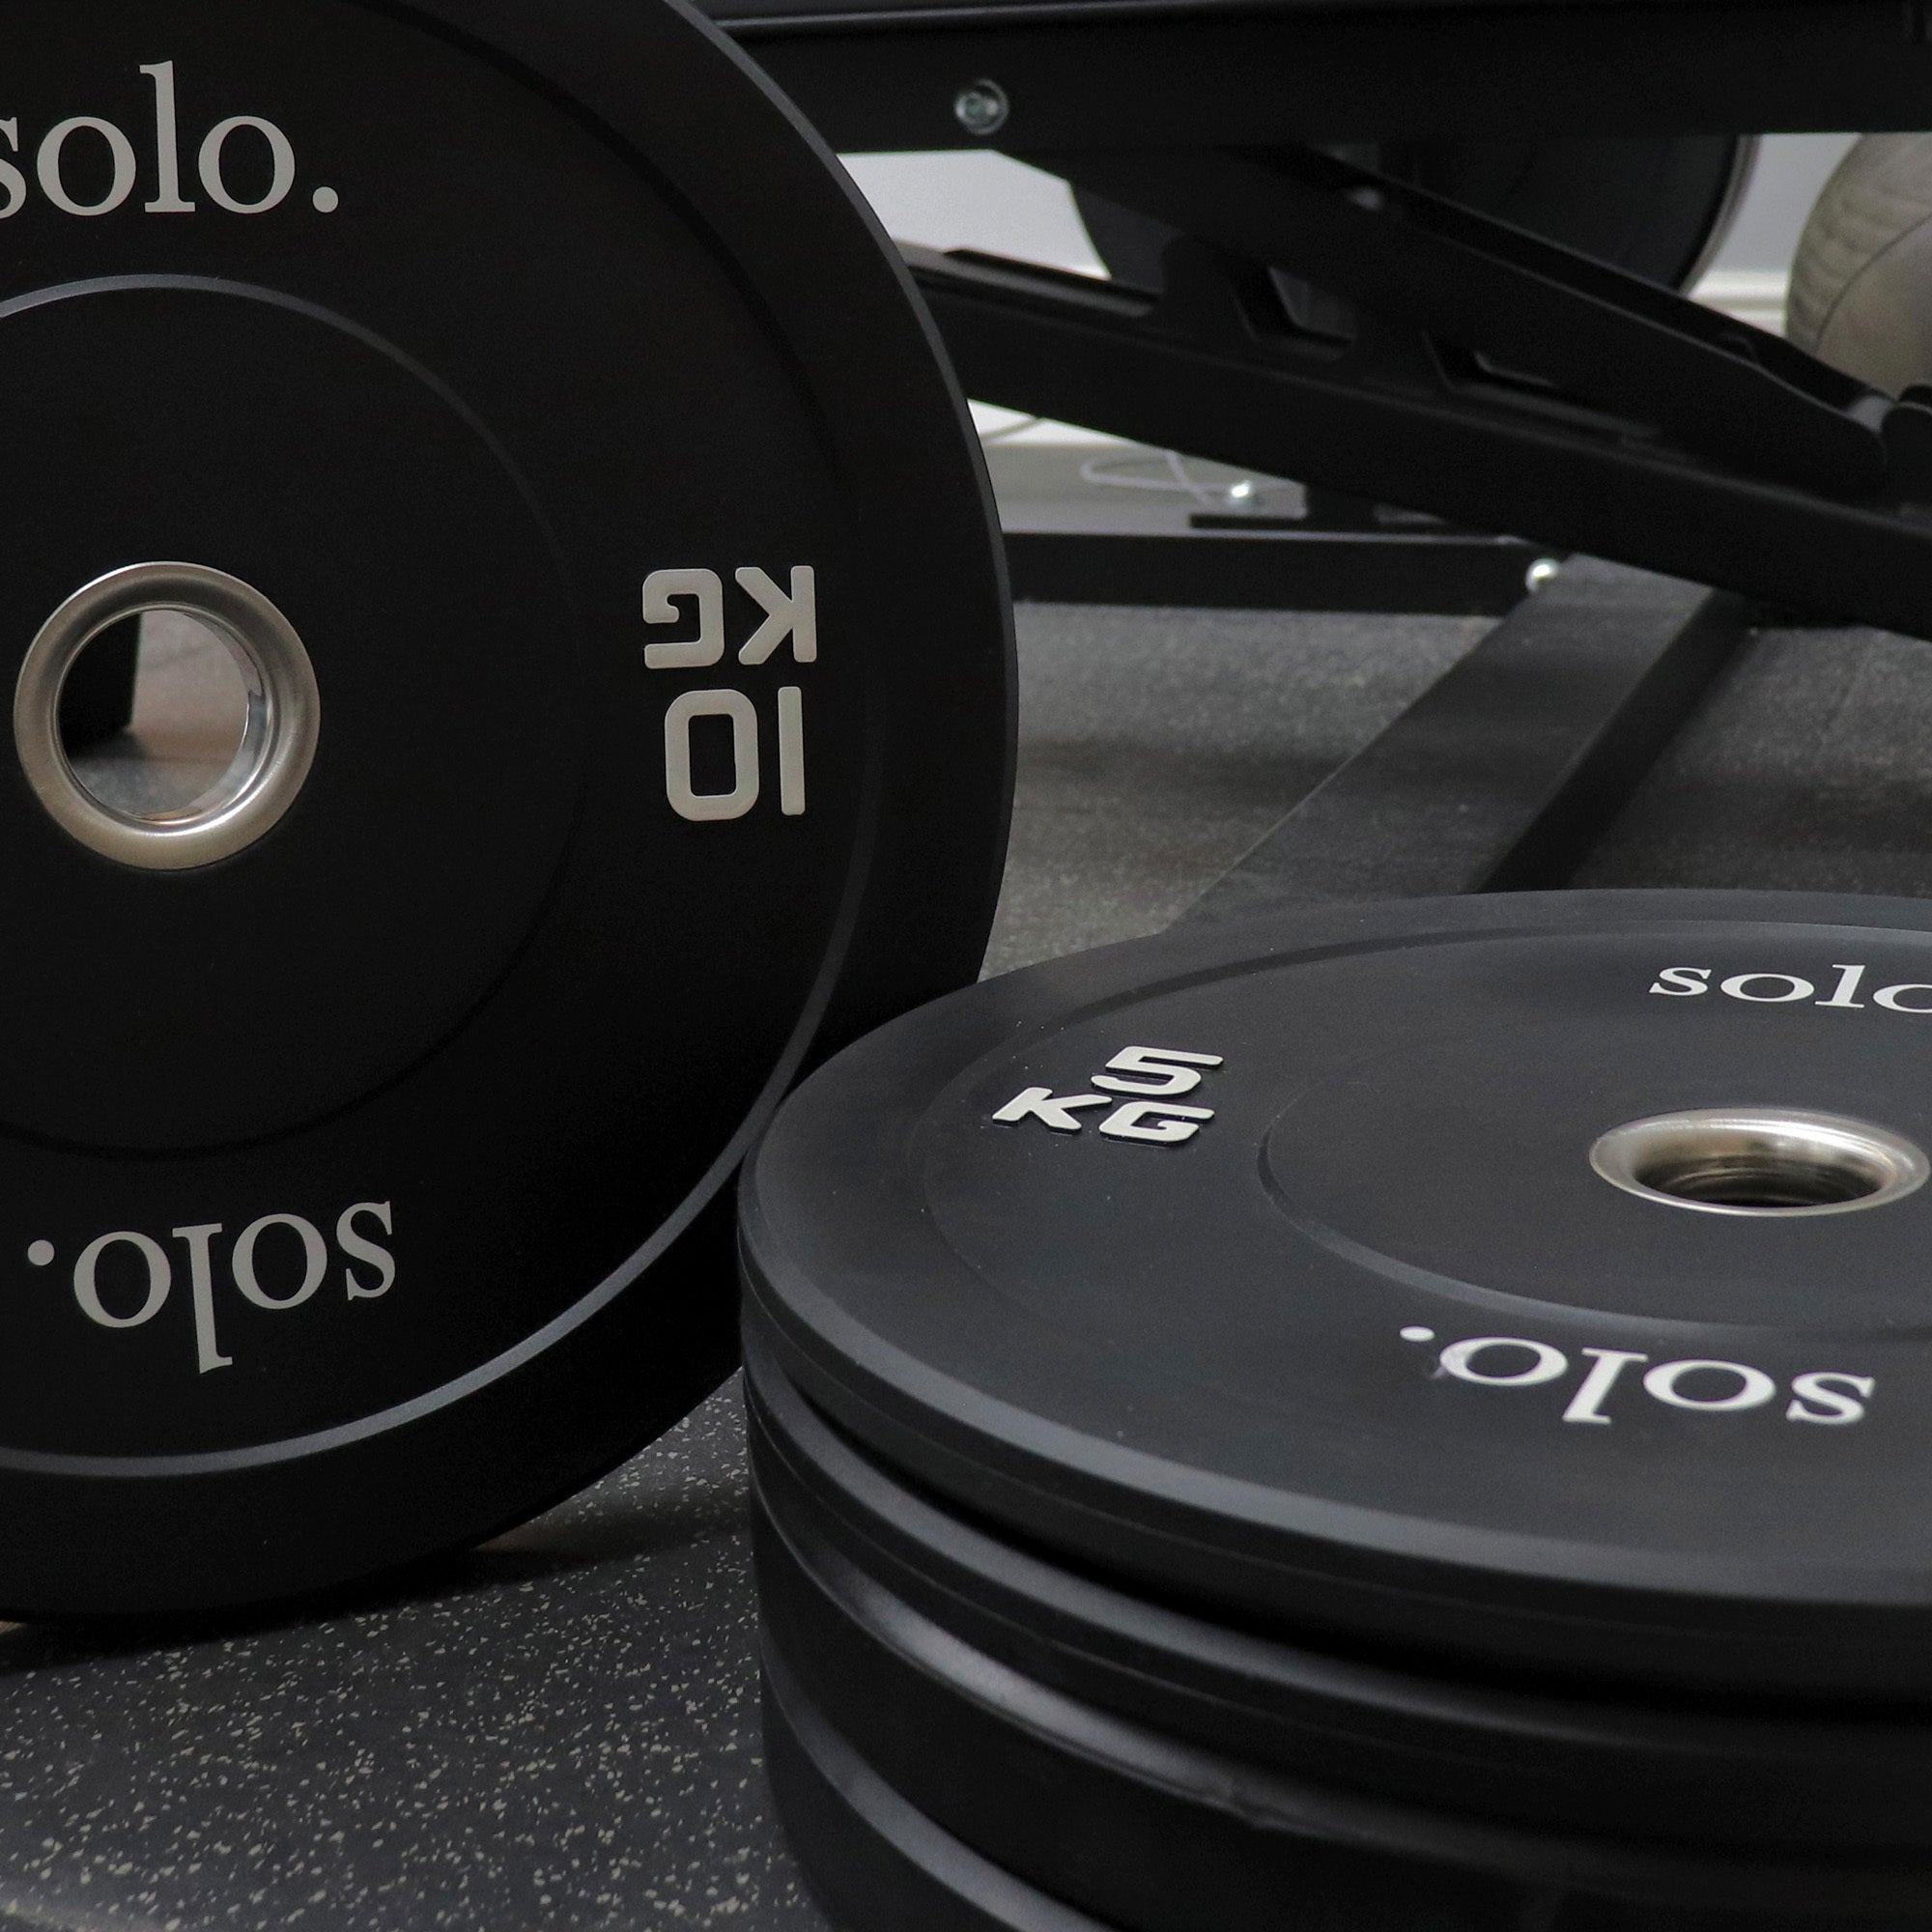 Olympic Bumper Weight Plates